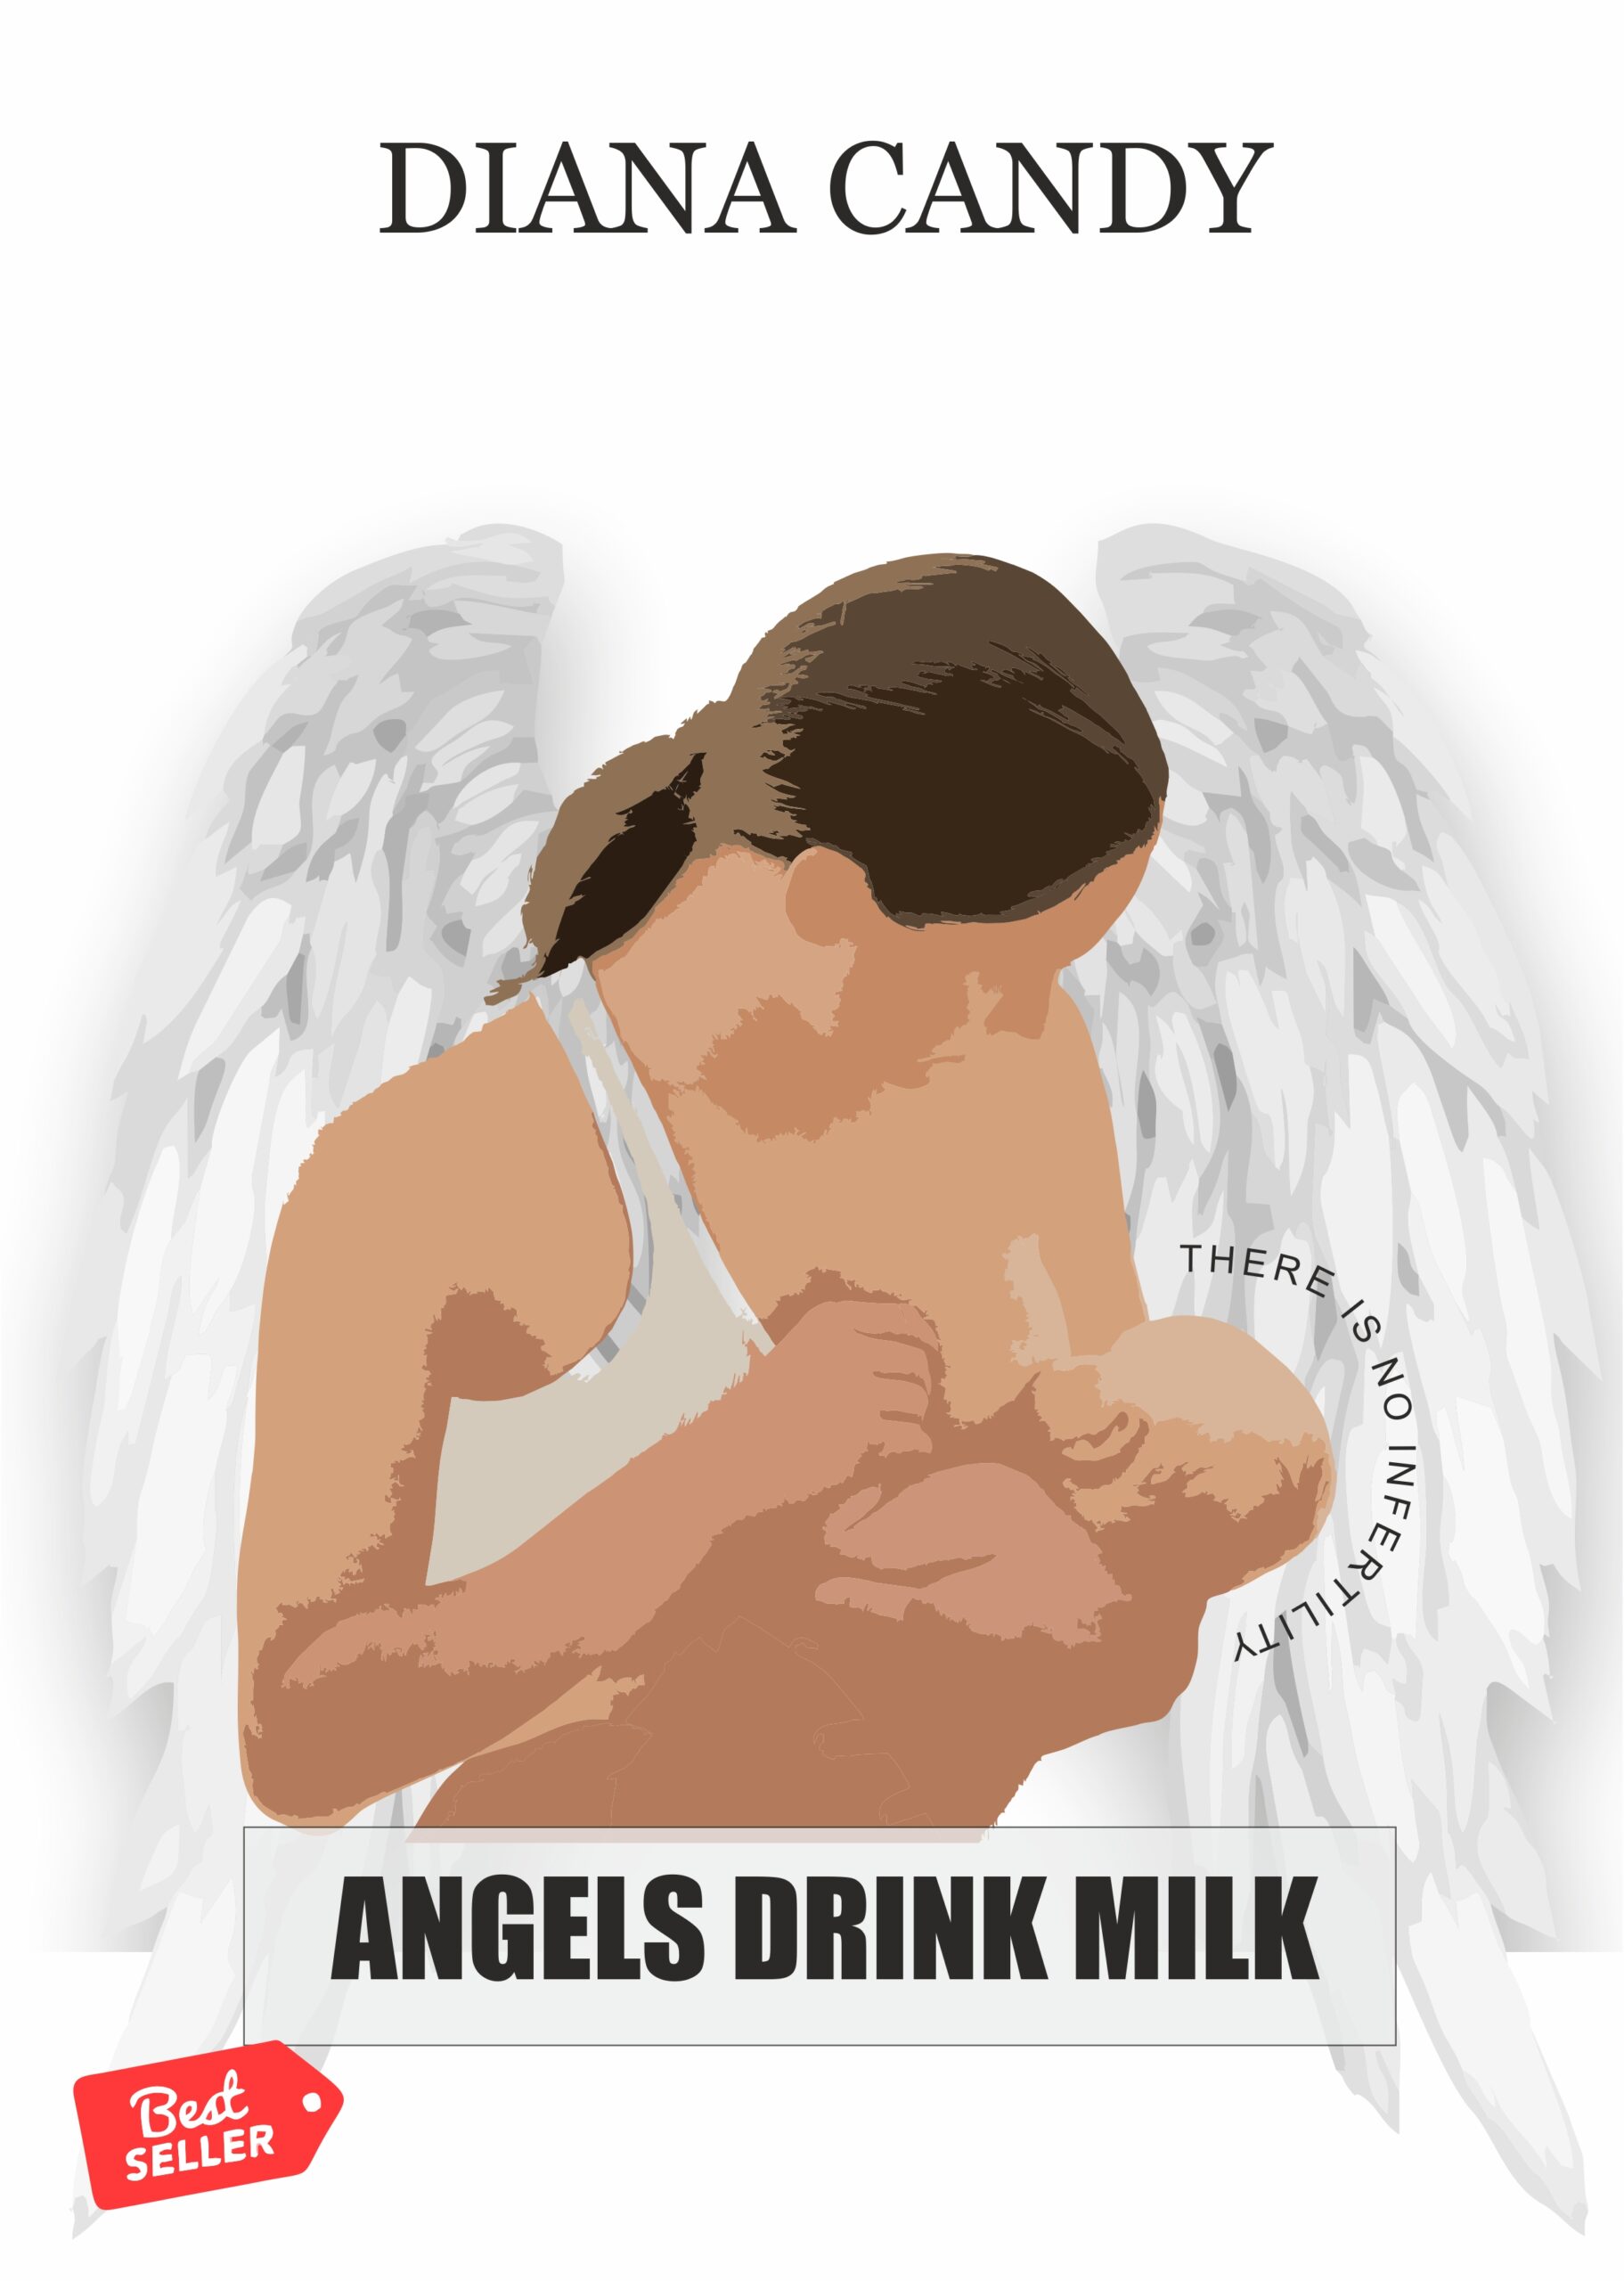 FREE: Angels drink Milk by Diana Candy